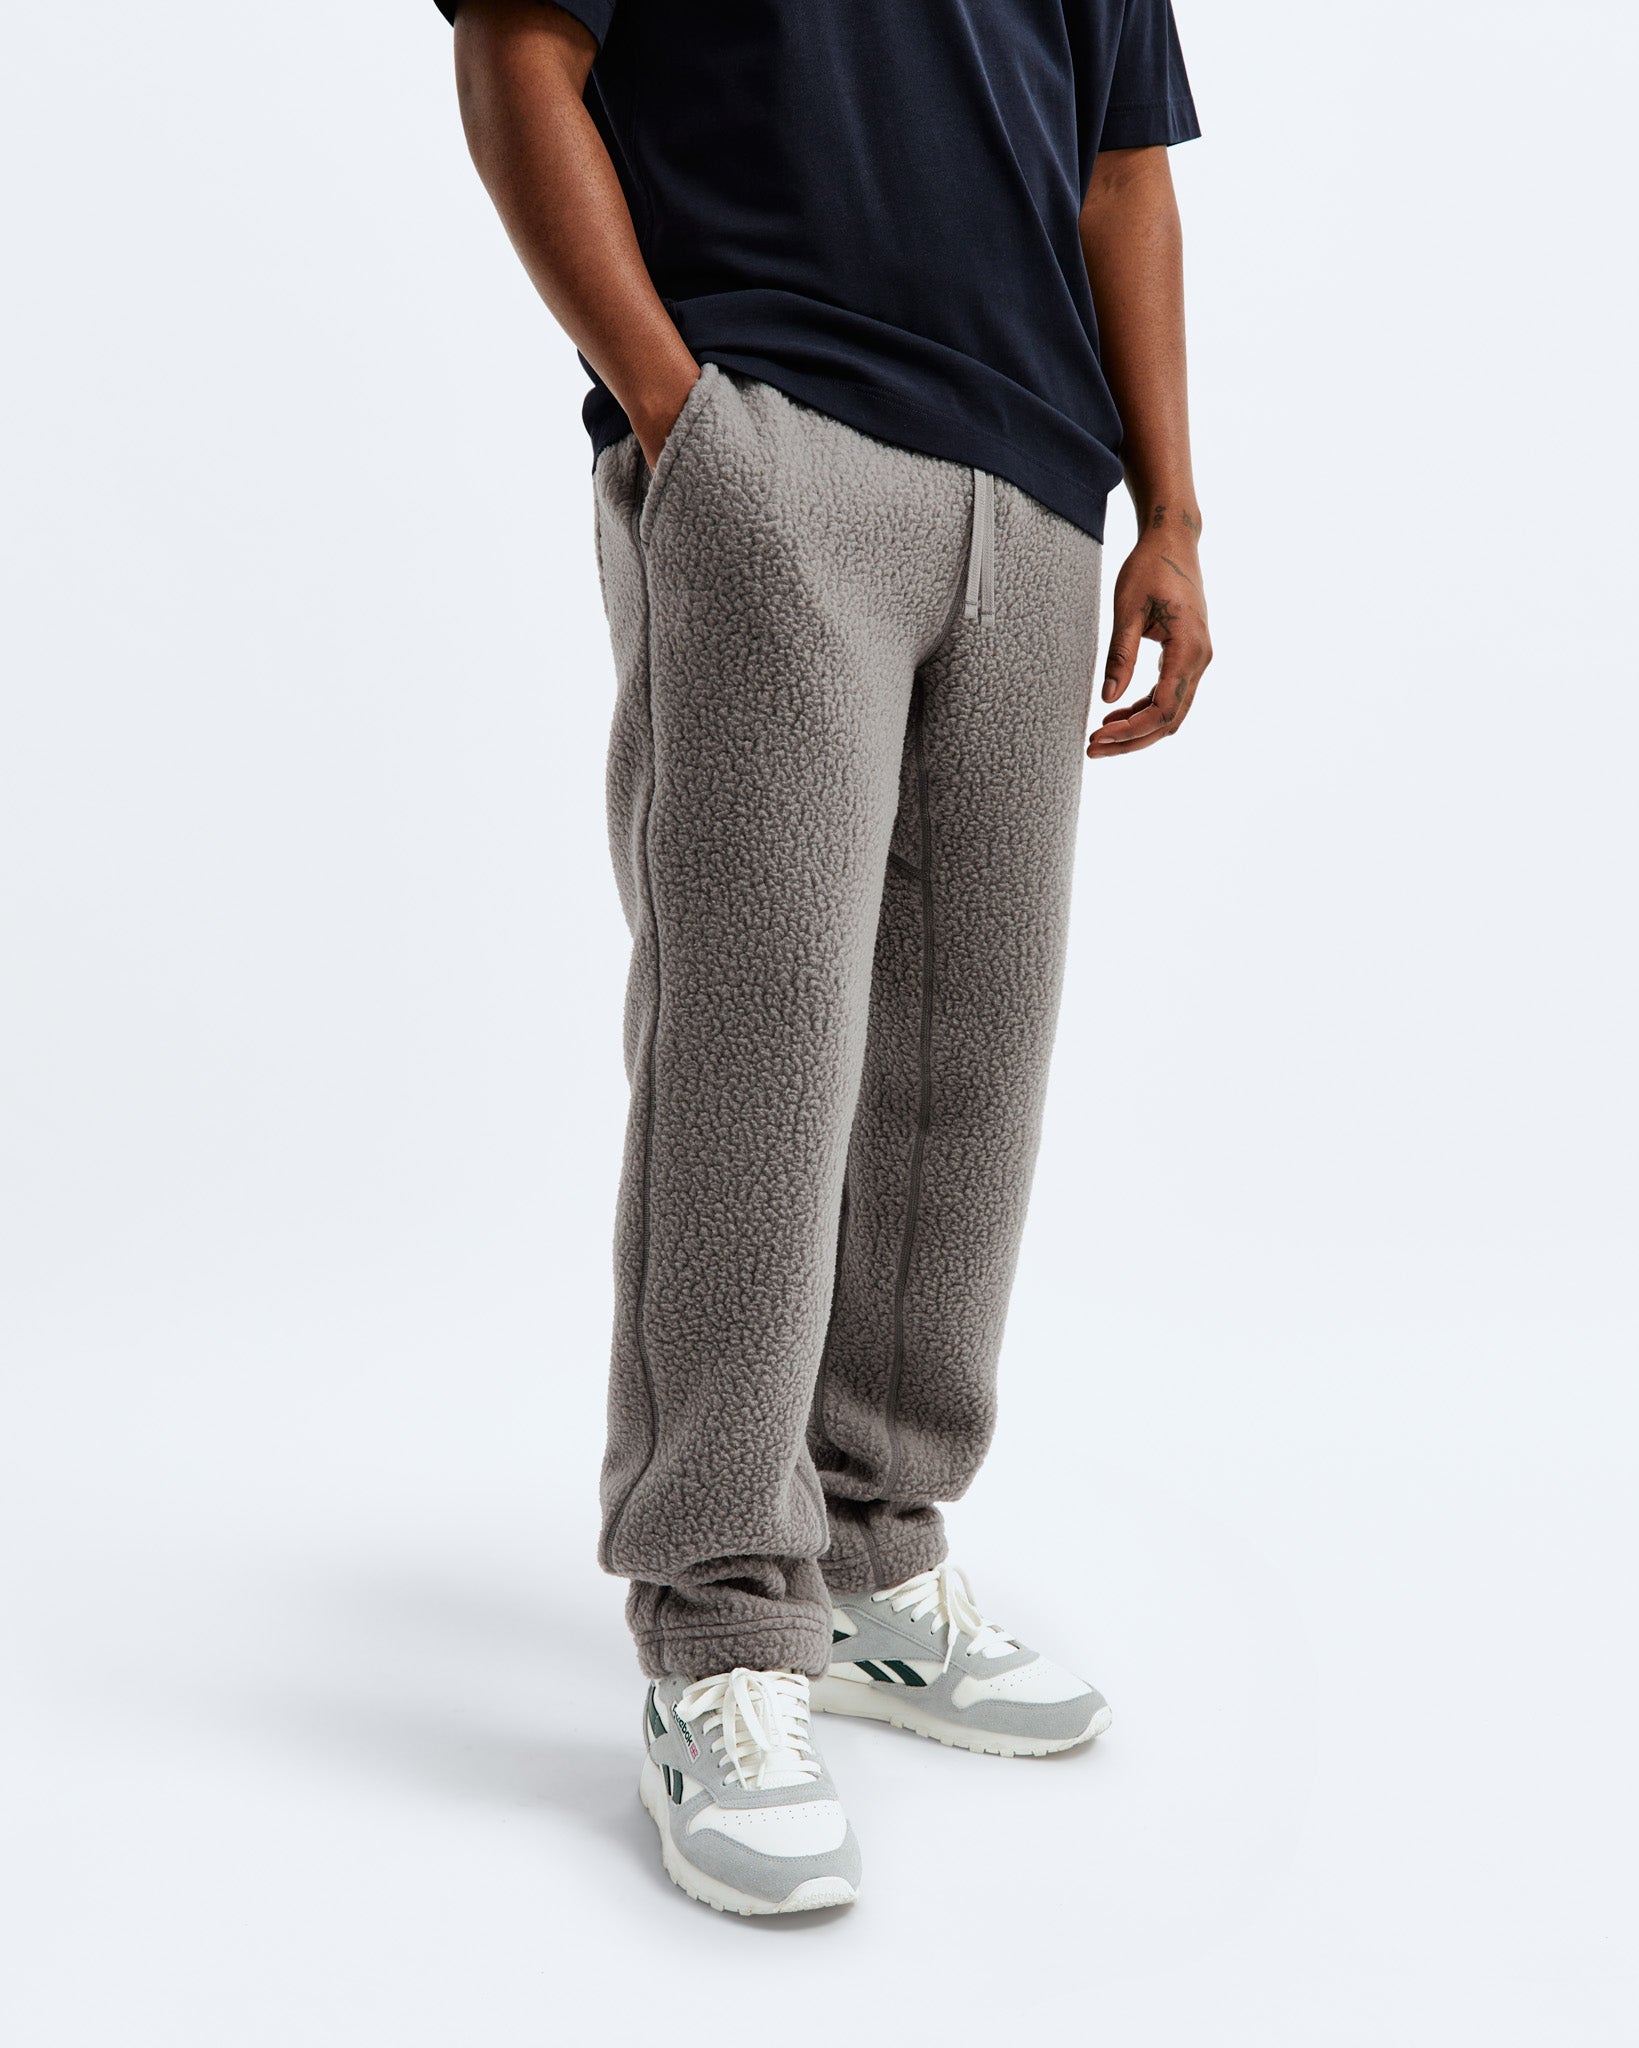 Polartec Thermal Pro Jogger | Reigning Champ